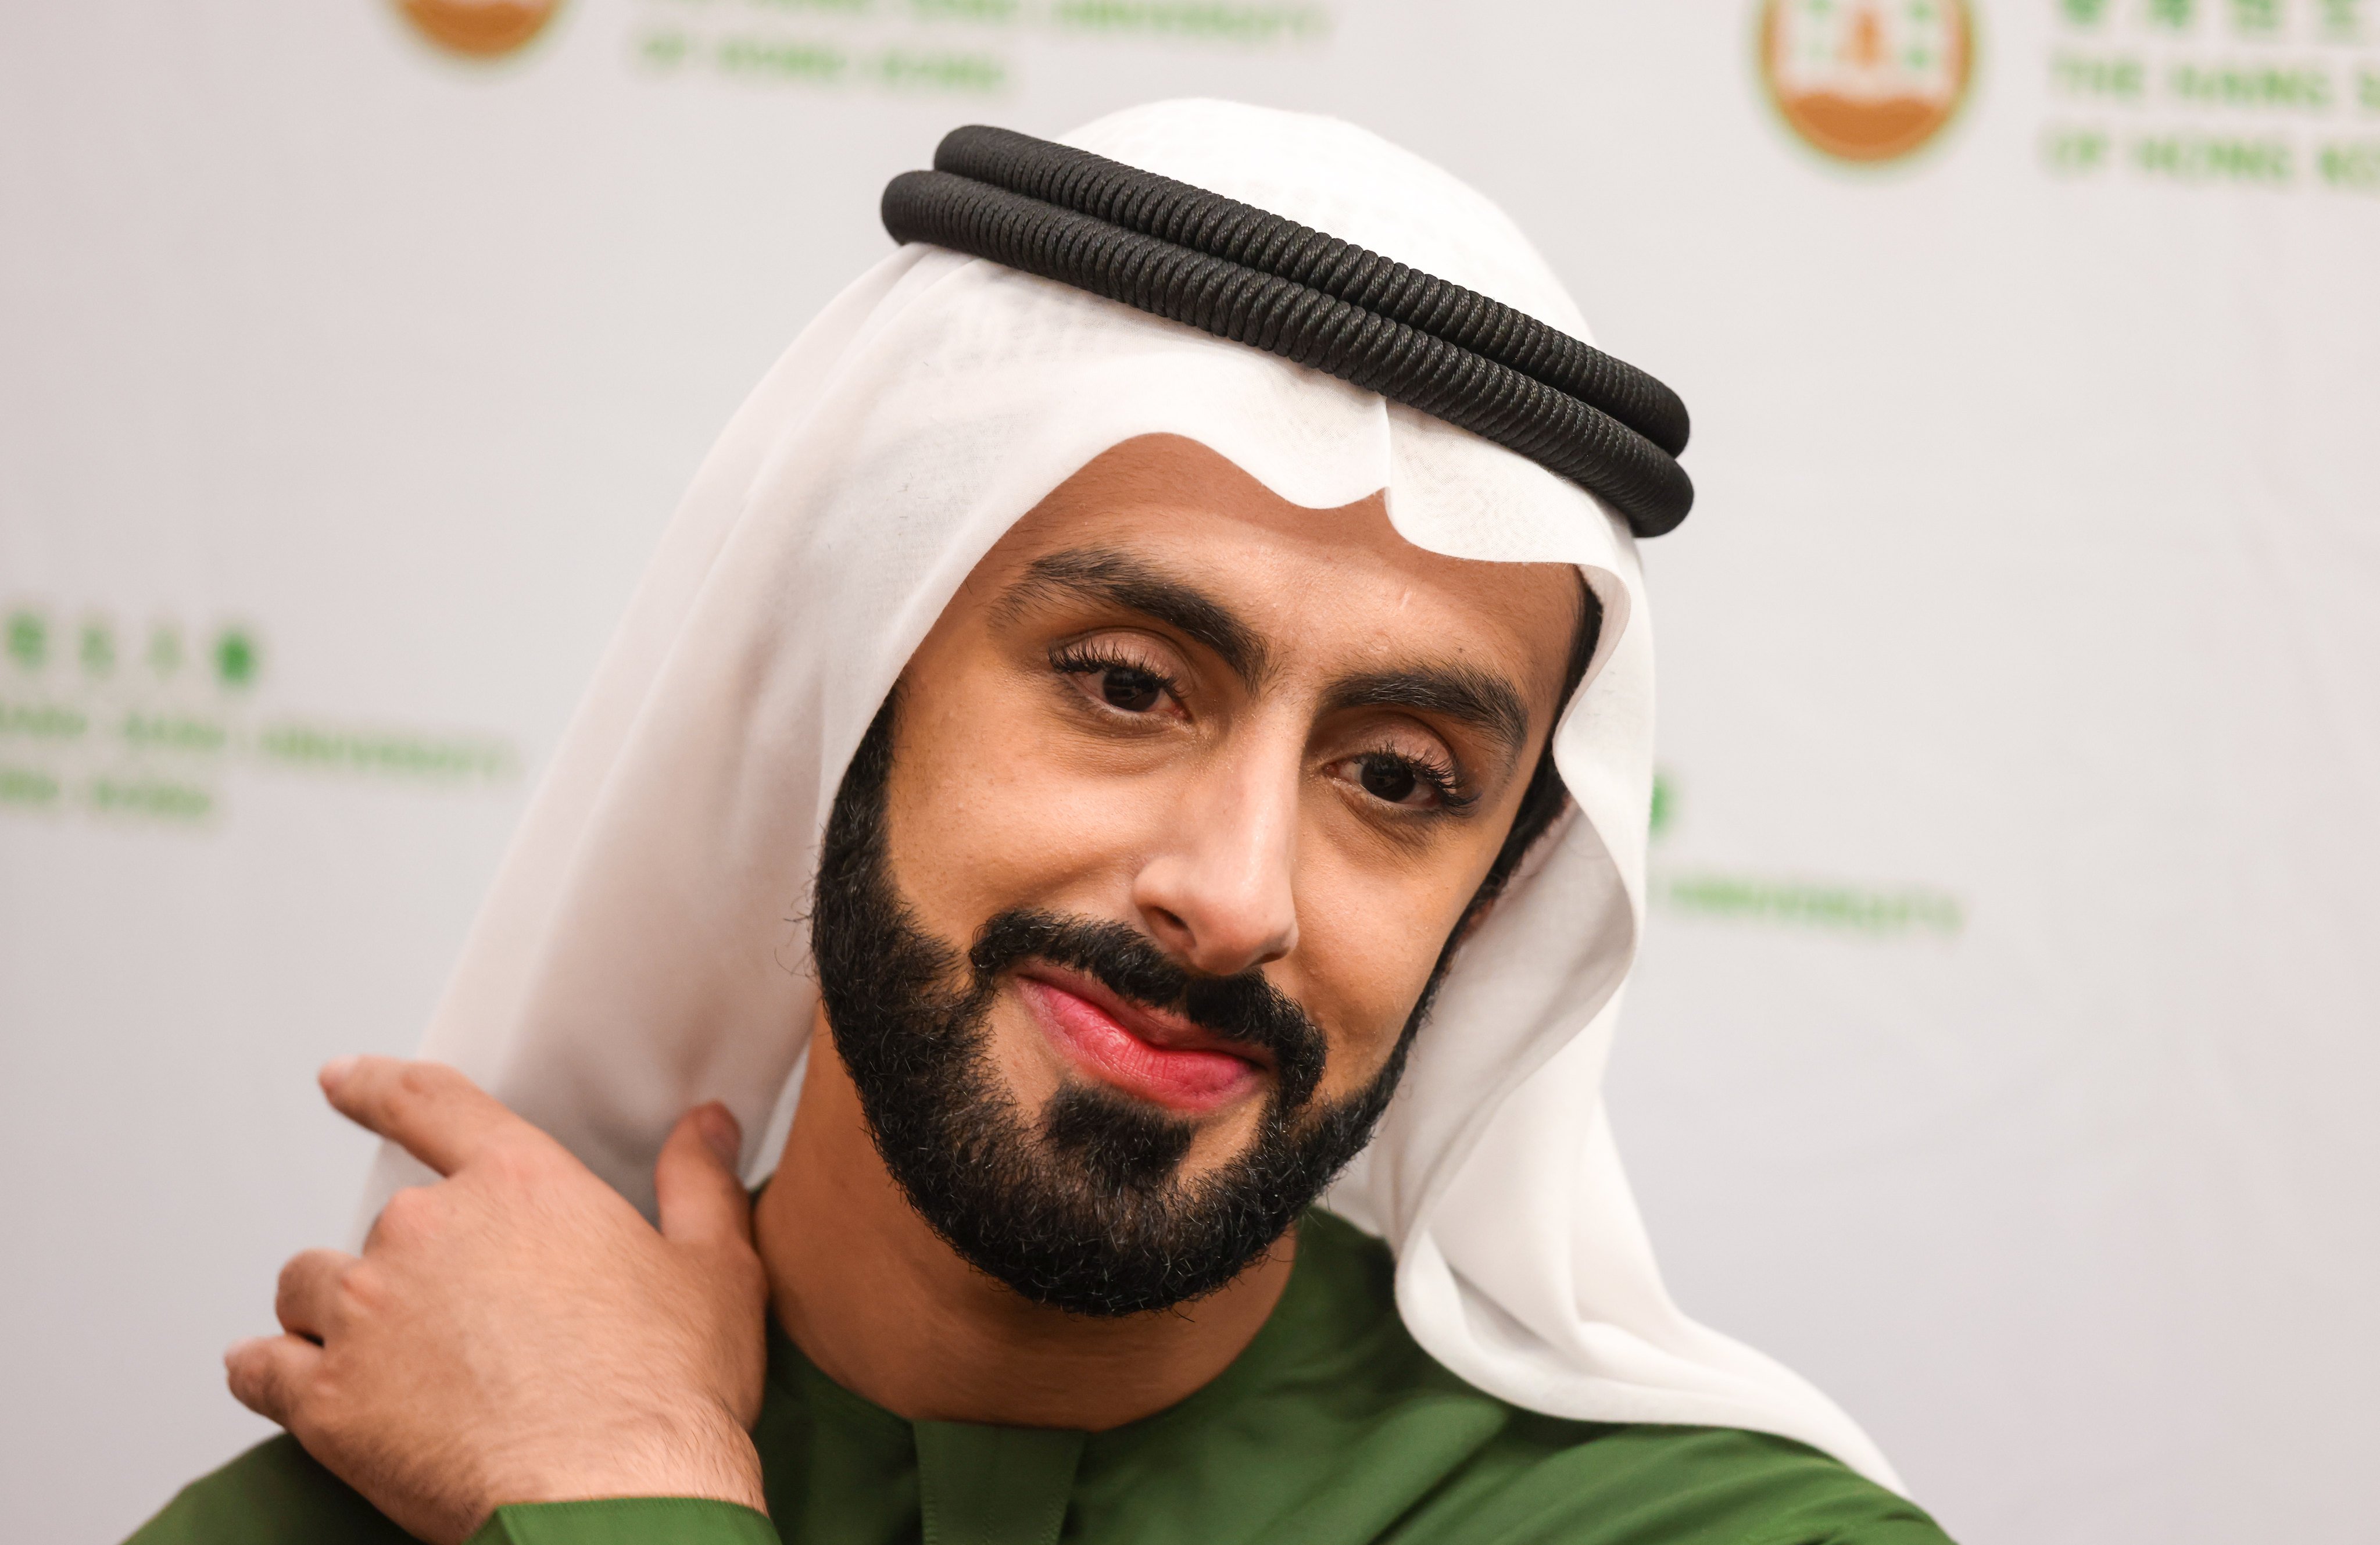 Sheikh Ali Al Maktoum made headlines after he called off the inauguration ceremony for his office at the eleventh hour in March due to “some urgent unexpected private matters”. Photo: Yik Yeung-man